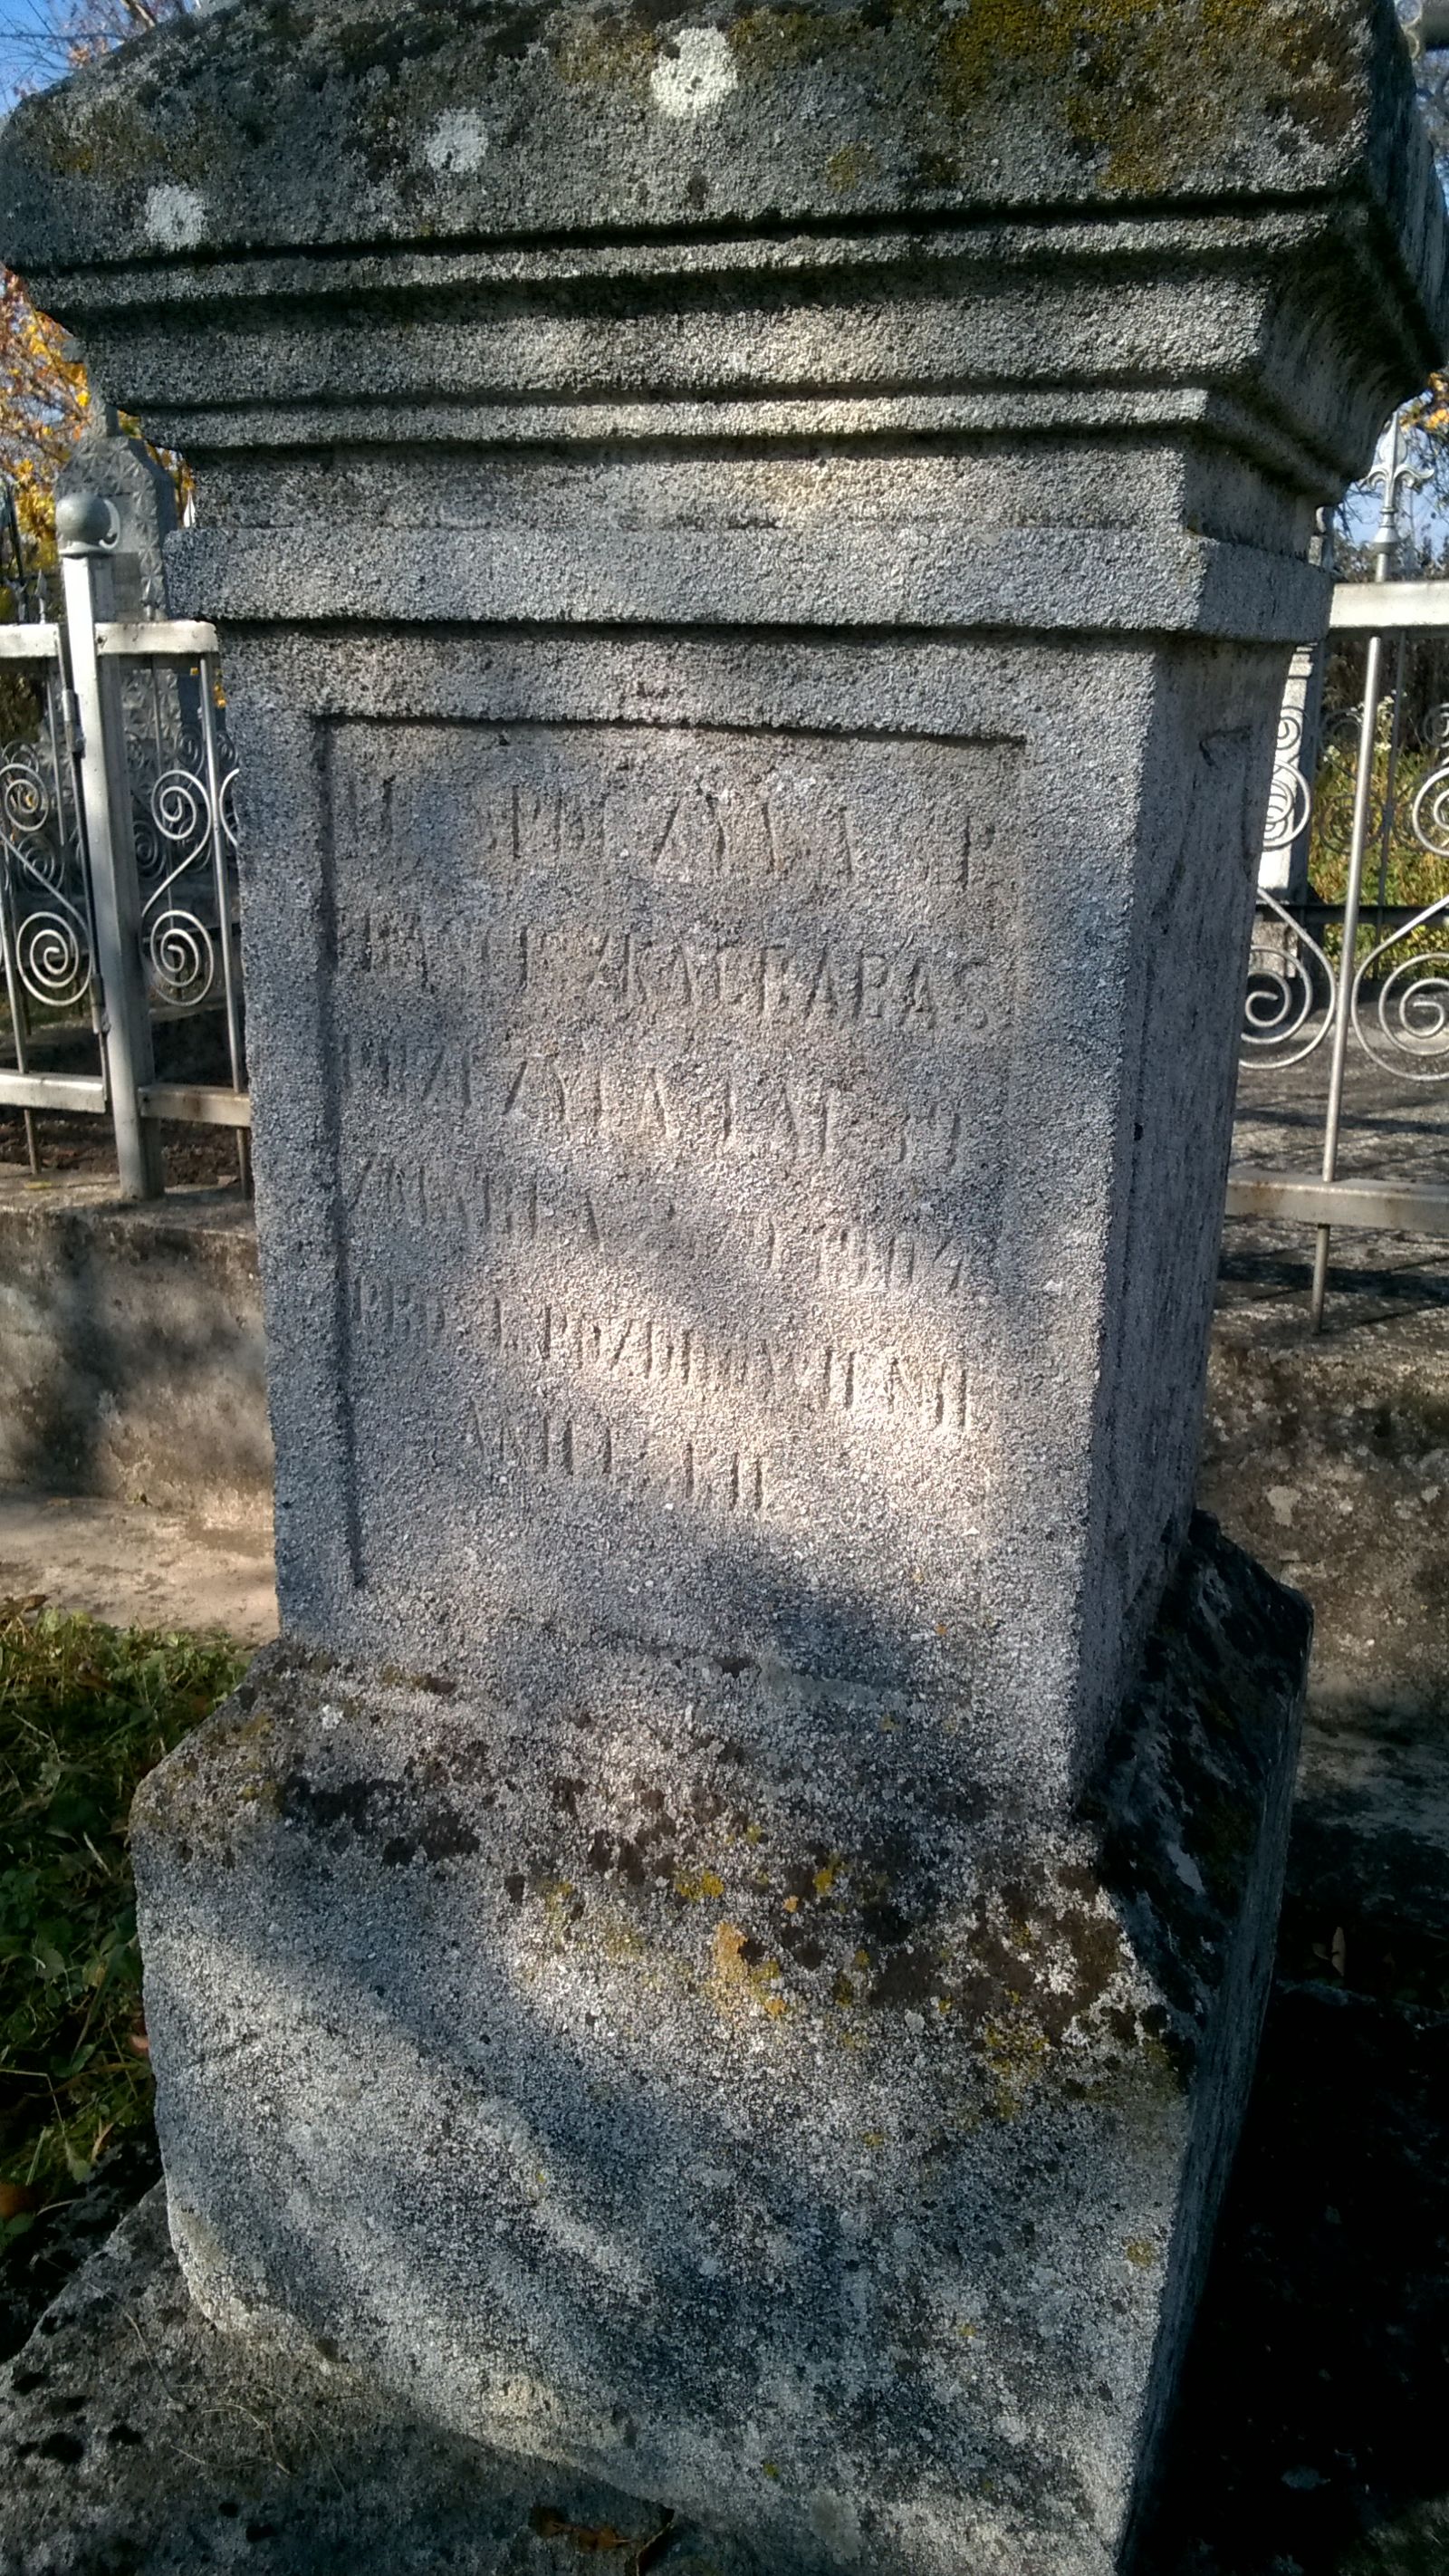 Inscription from the gravestone of Franciszka Grabas, Ihrownica cemetery